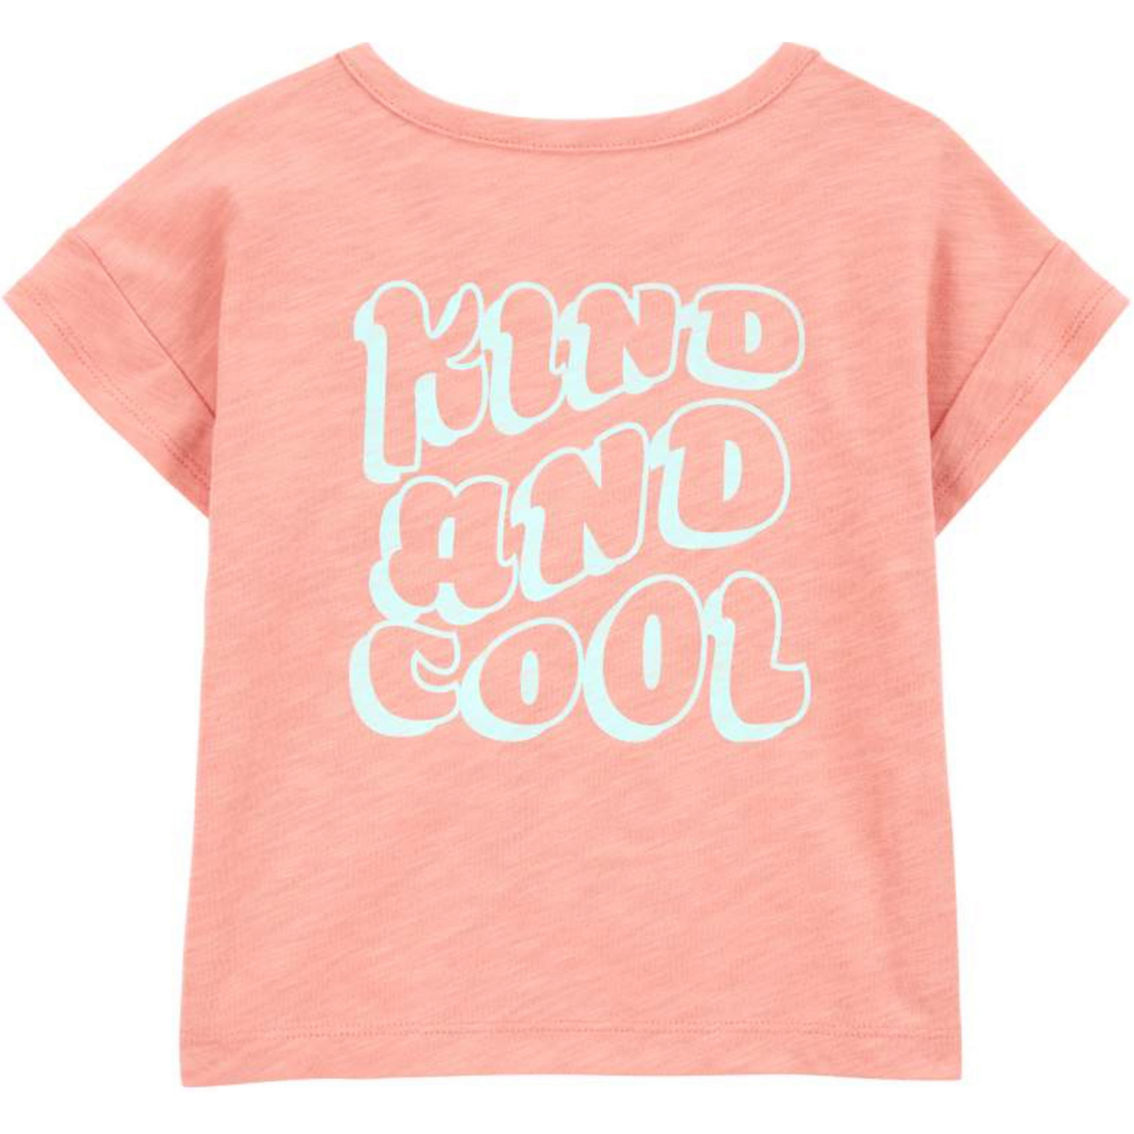 Carter's Toddler Girls Flamingo Kind and Cool Tee - Image 2 of 2